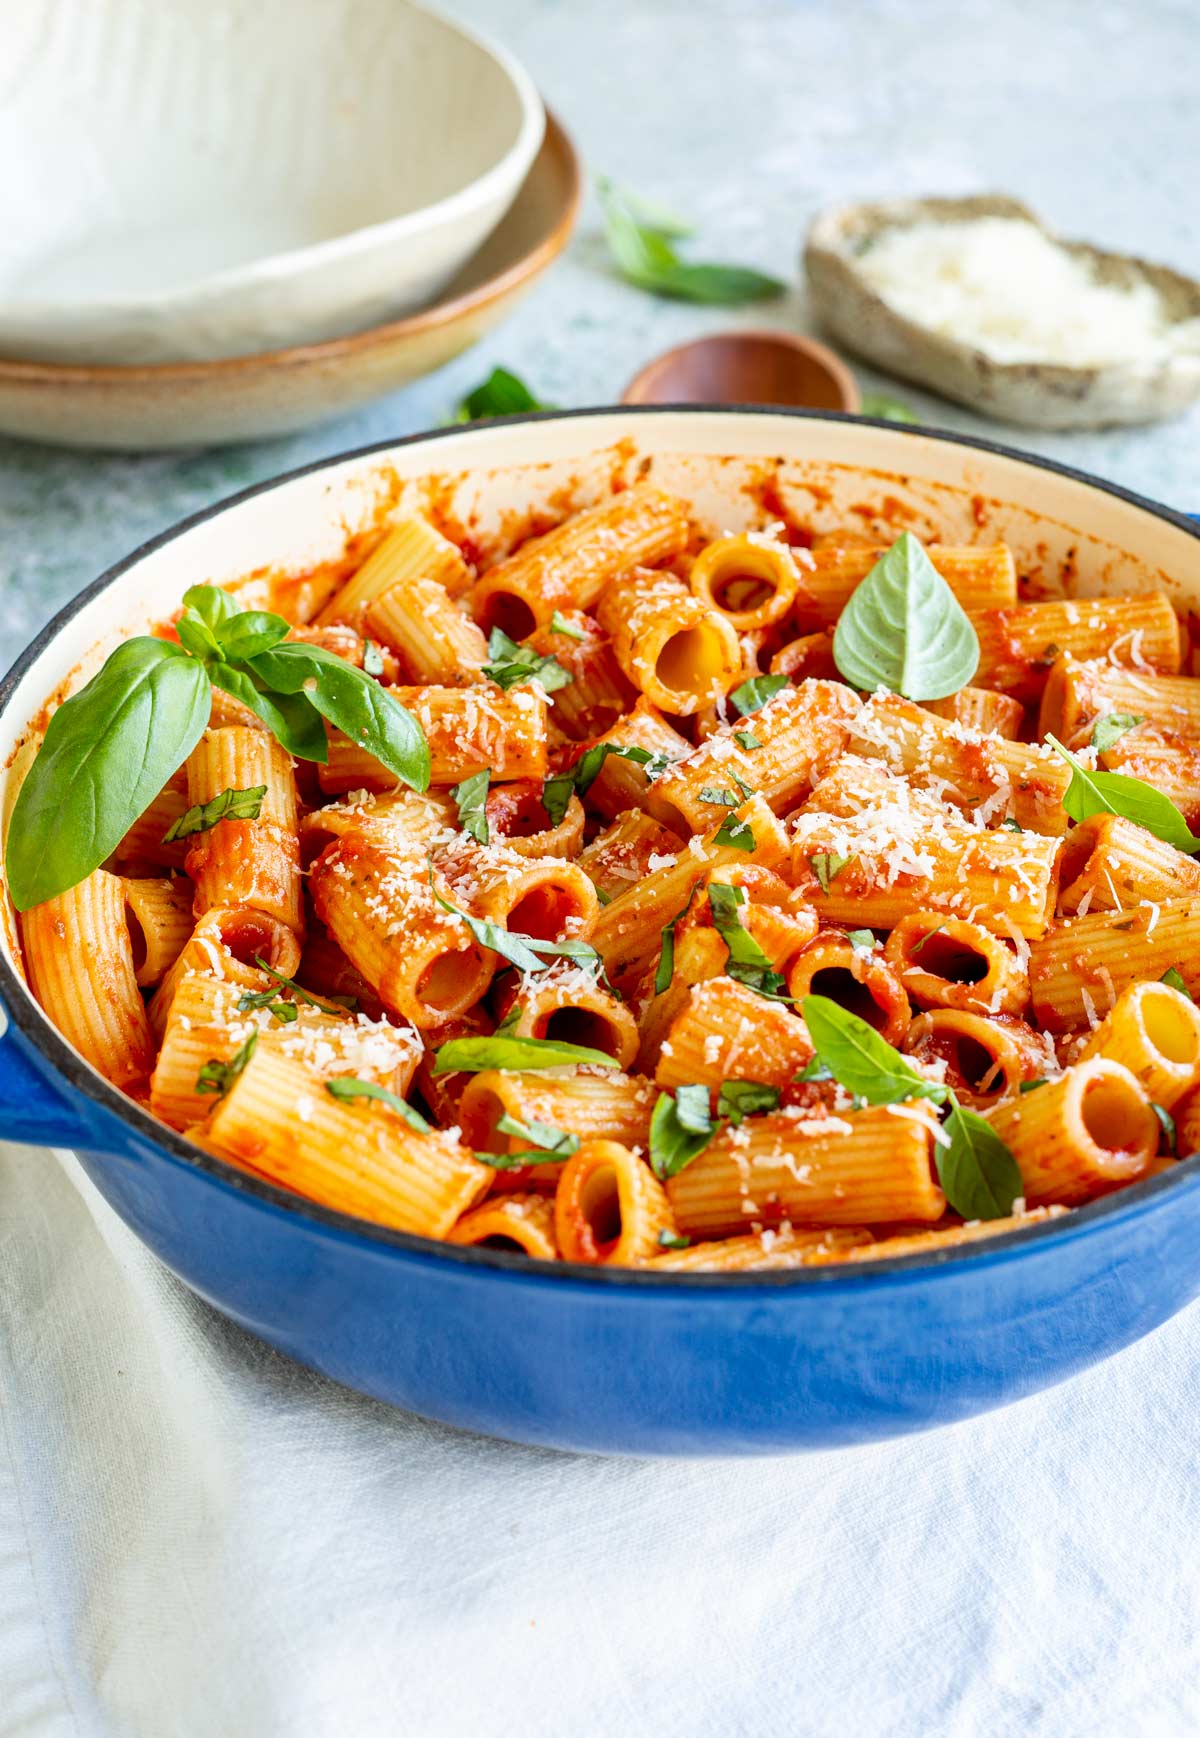 a blue cast iron skillet filled with rigatoni pasta in a tomato sauce